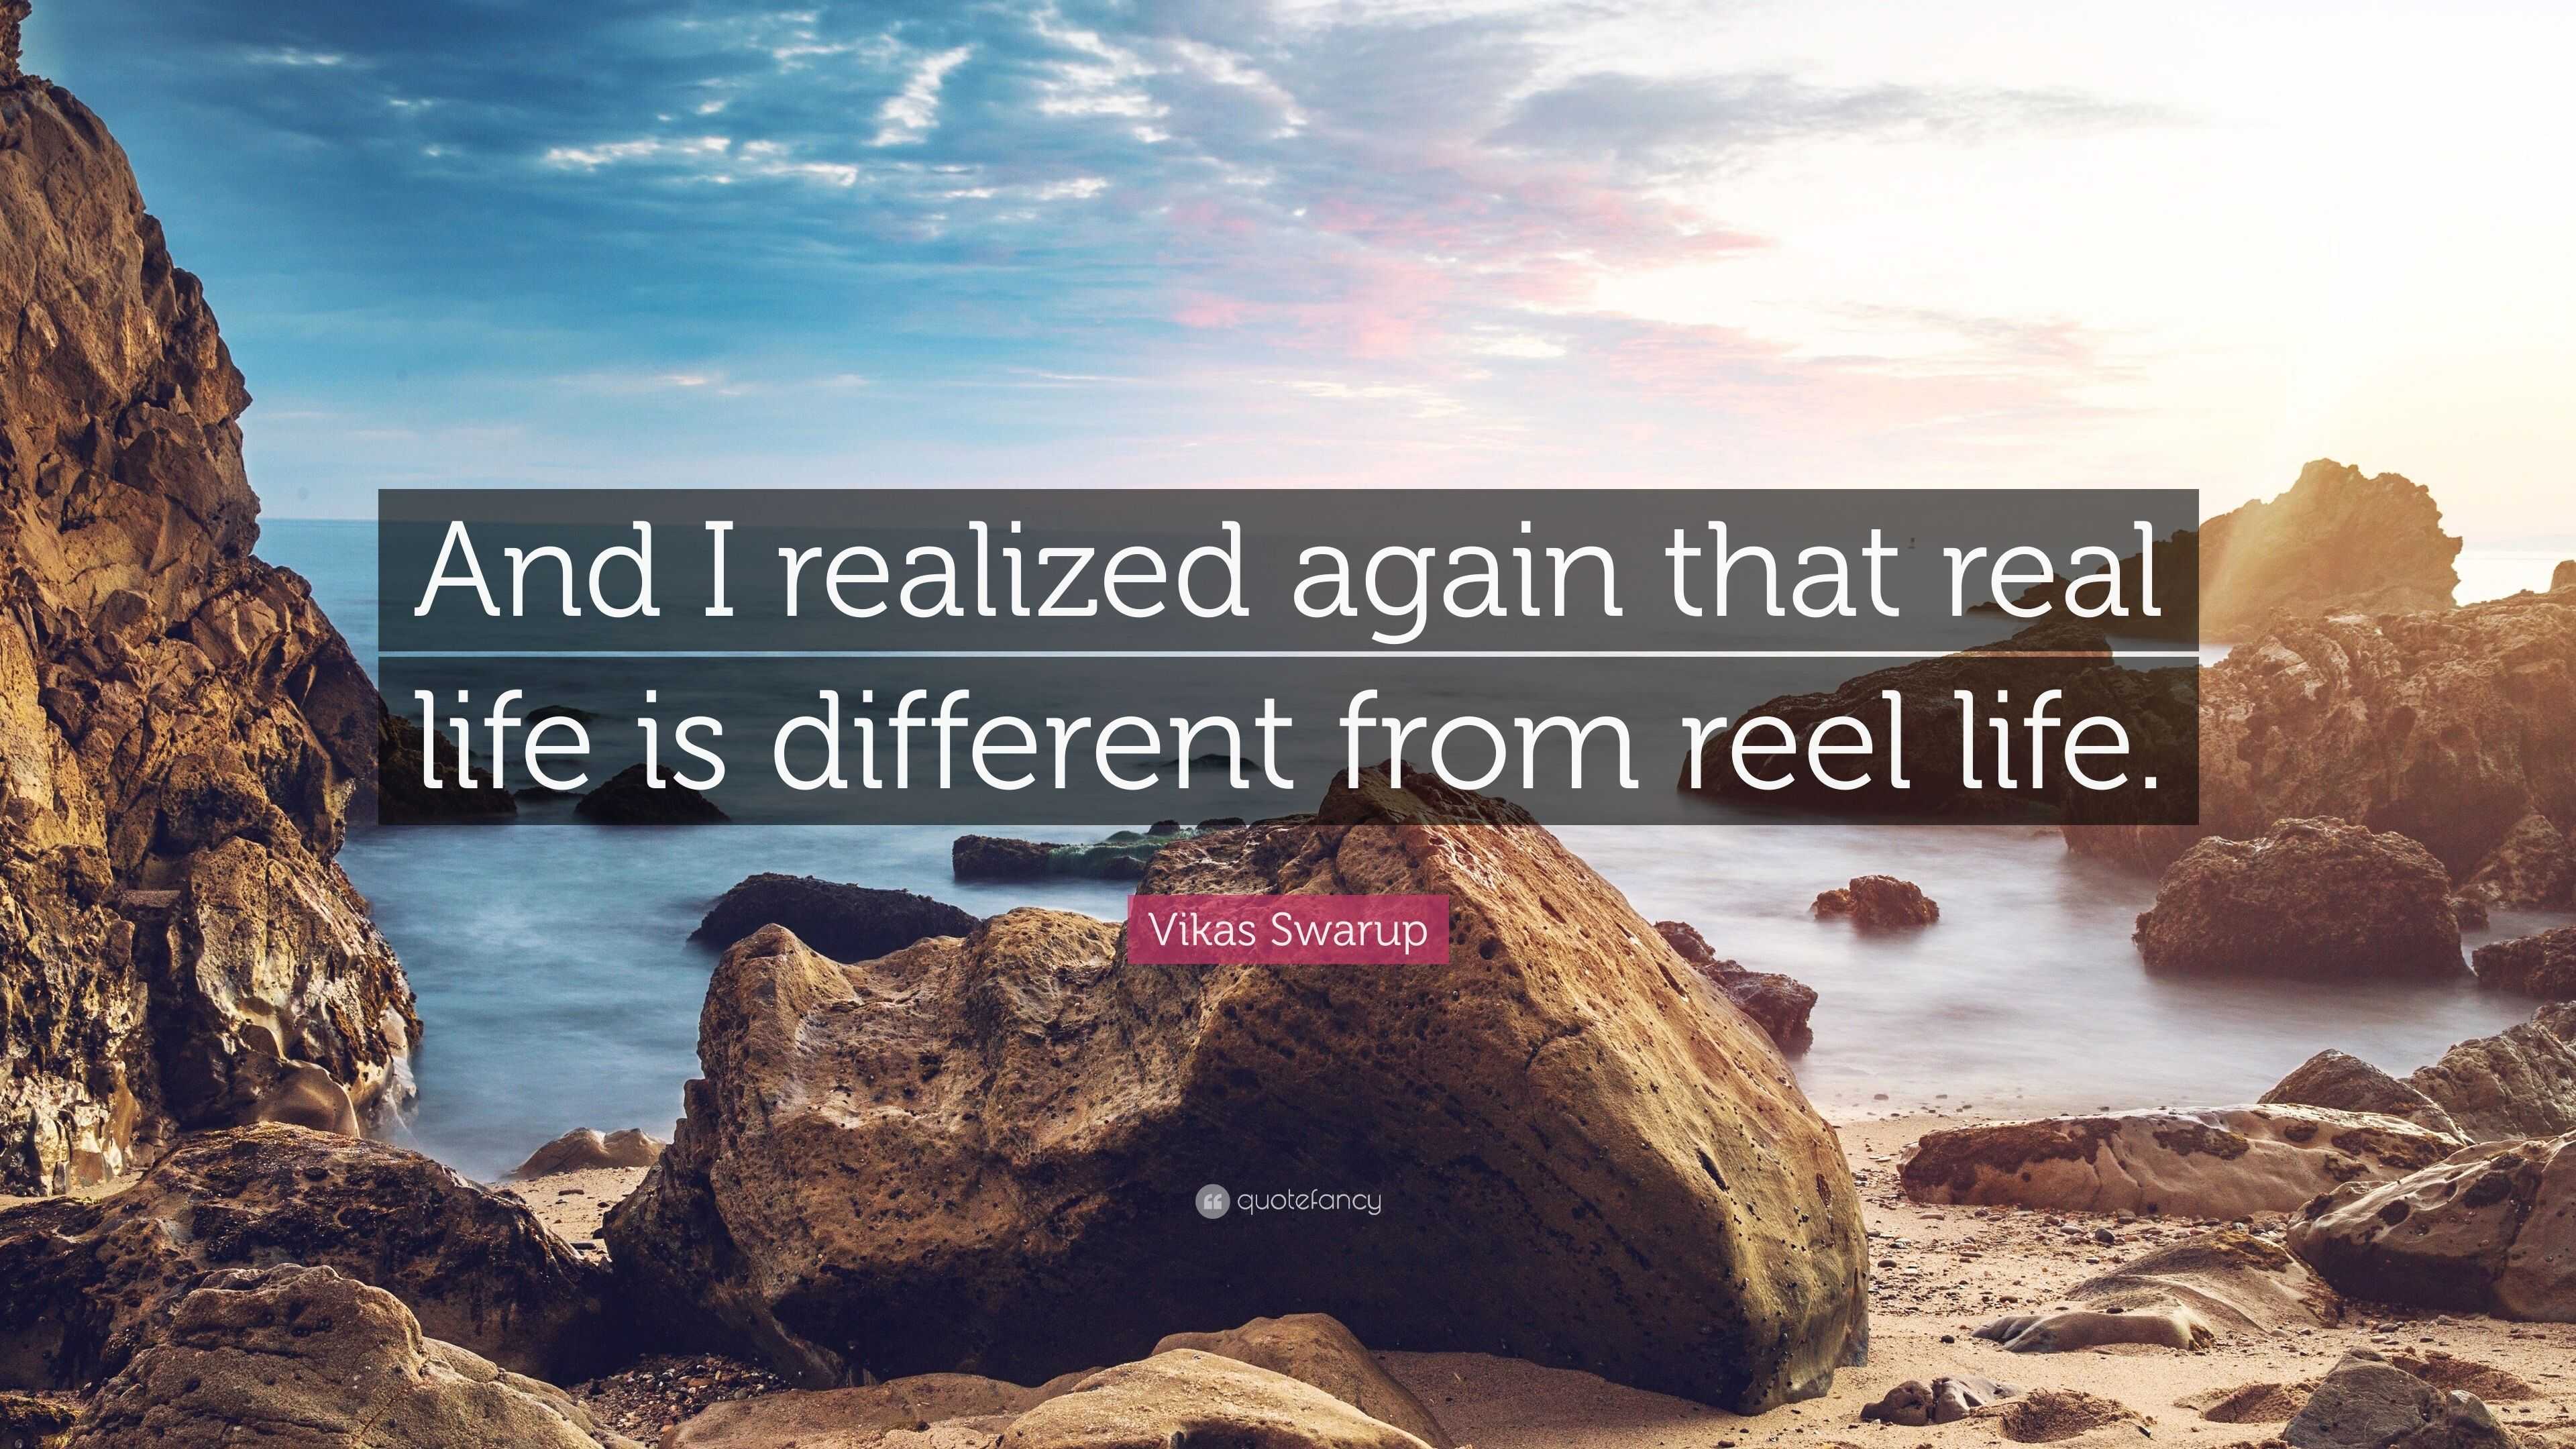 Vikas Swarup Quote: “And I realized again that real life is